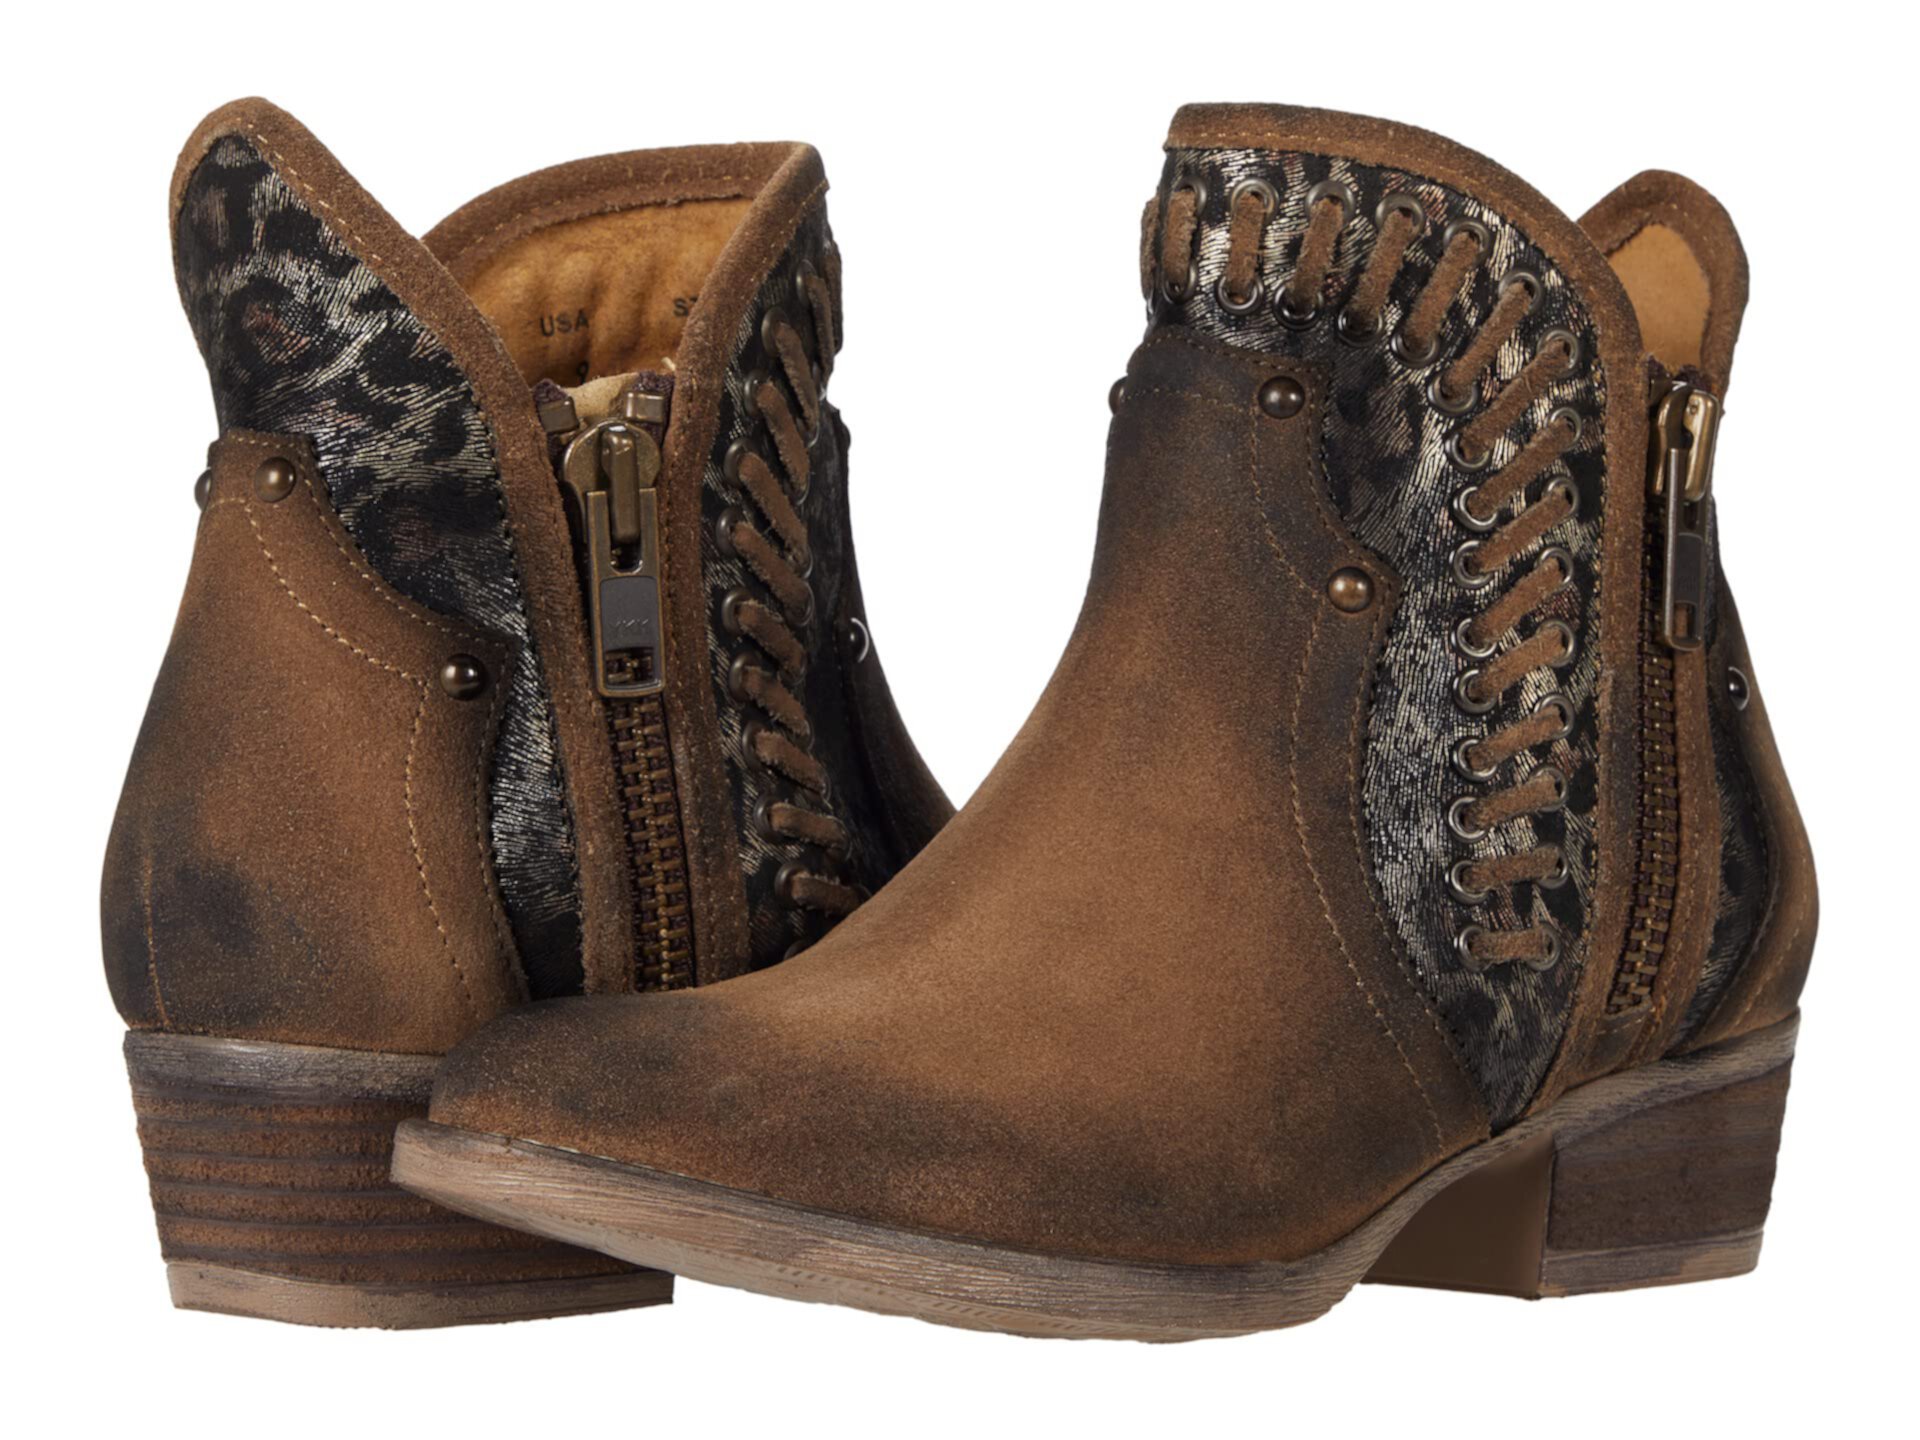 Q0199 Corral Boots